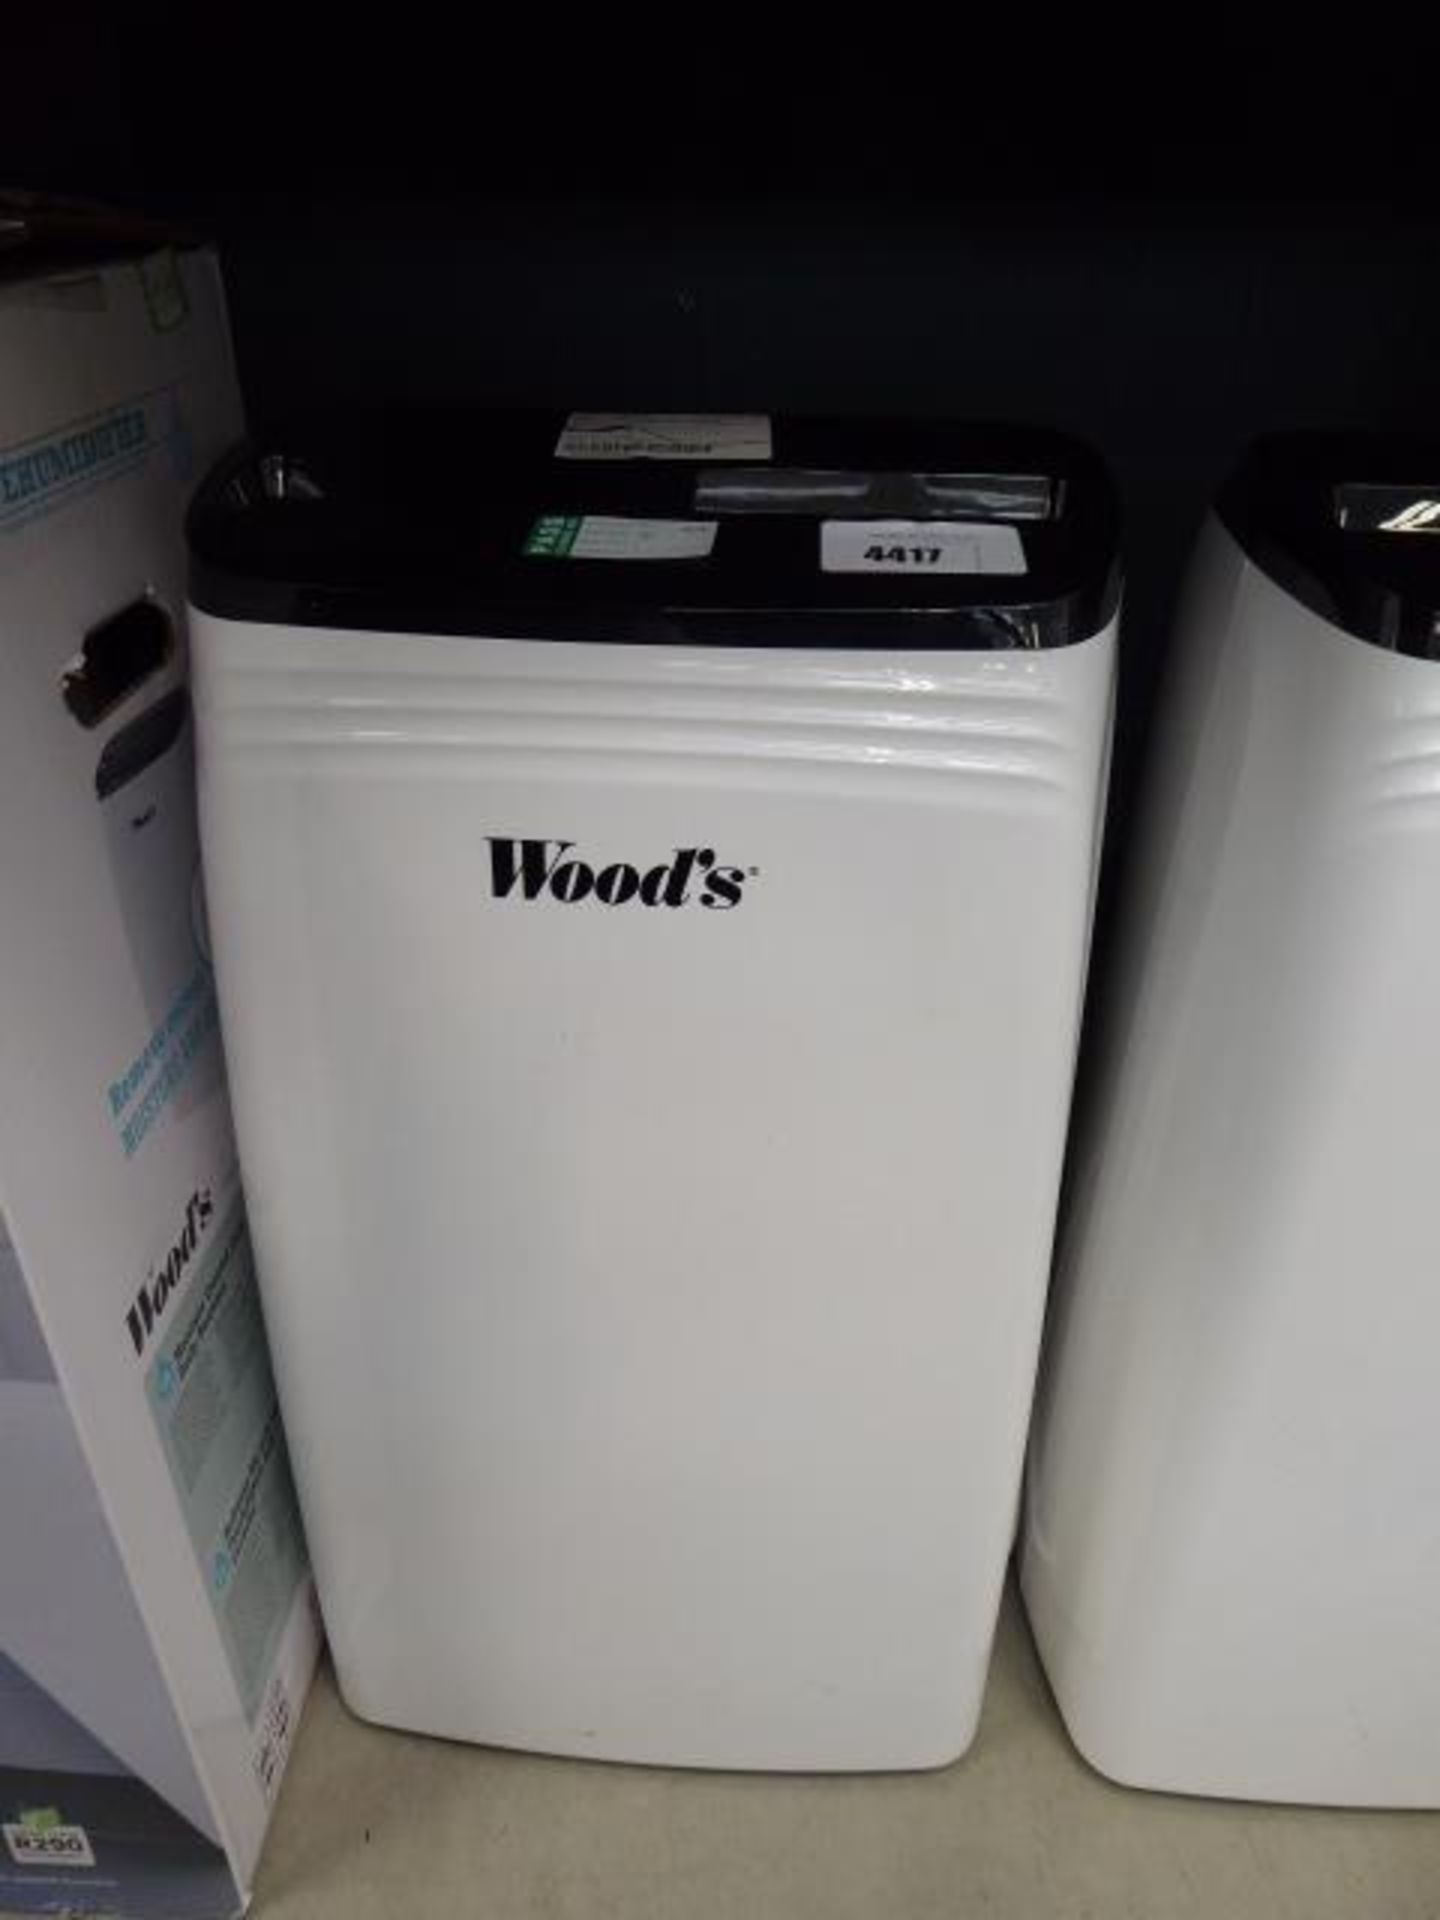 Woods dehumidifier (unboxed)